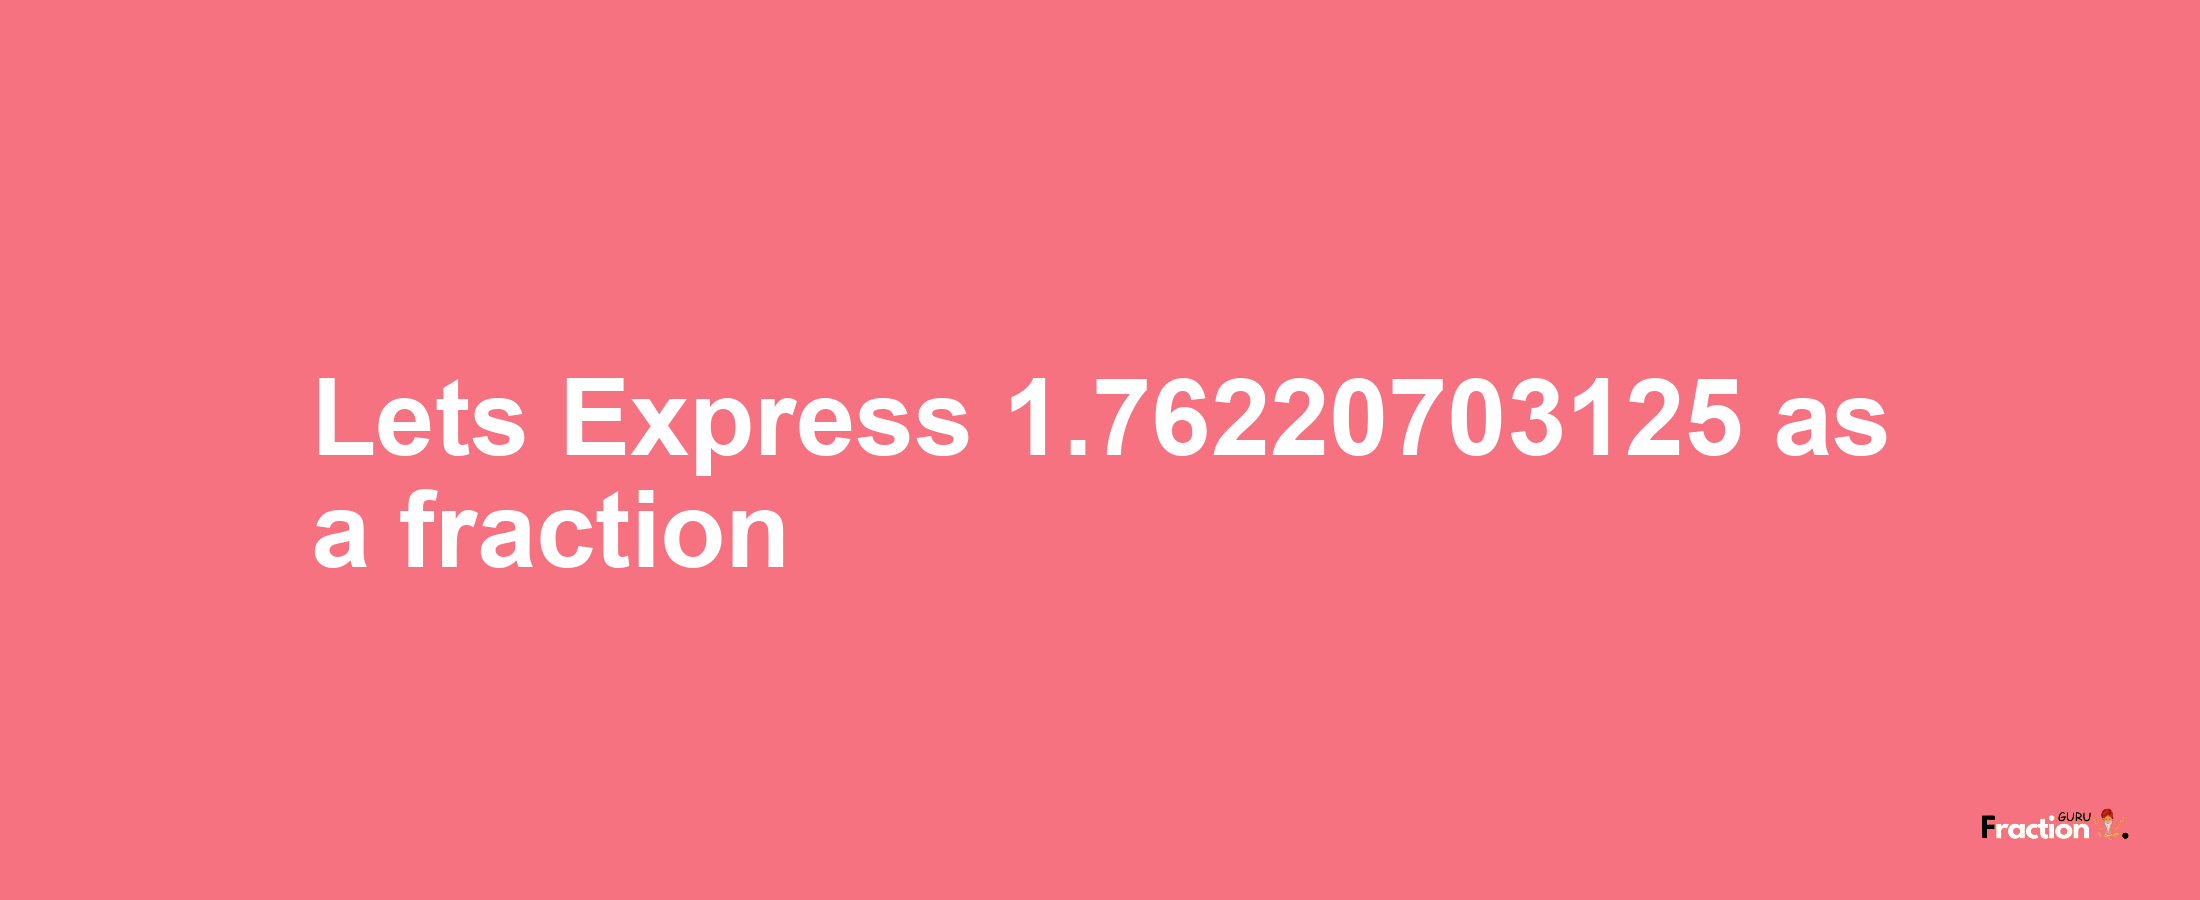 Lets Express 1.76220703125 as afraction